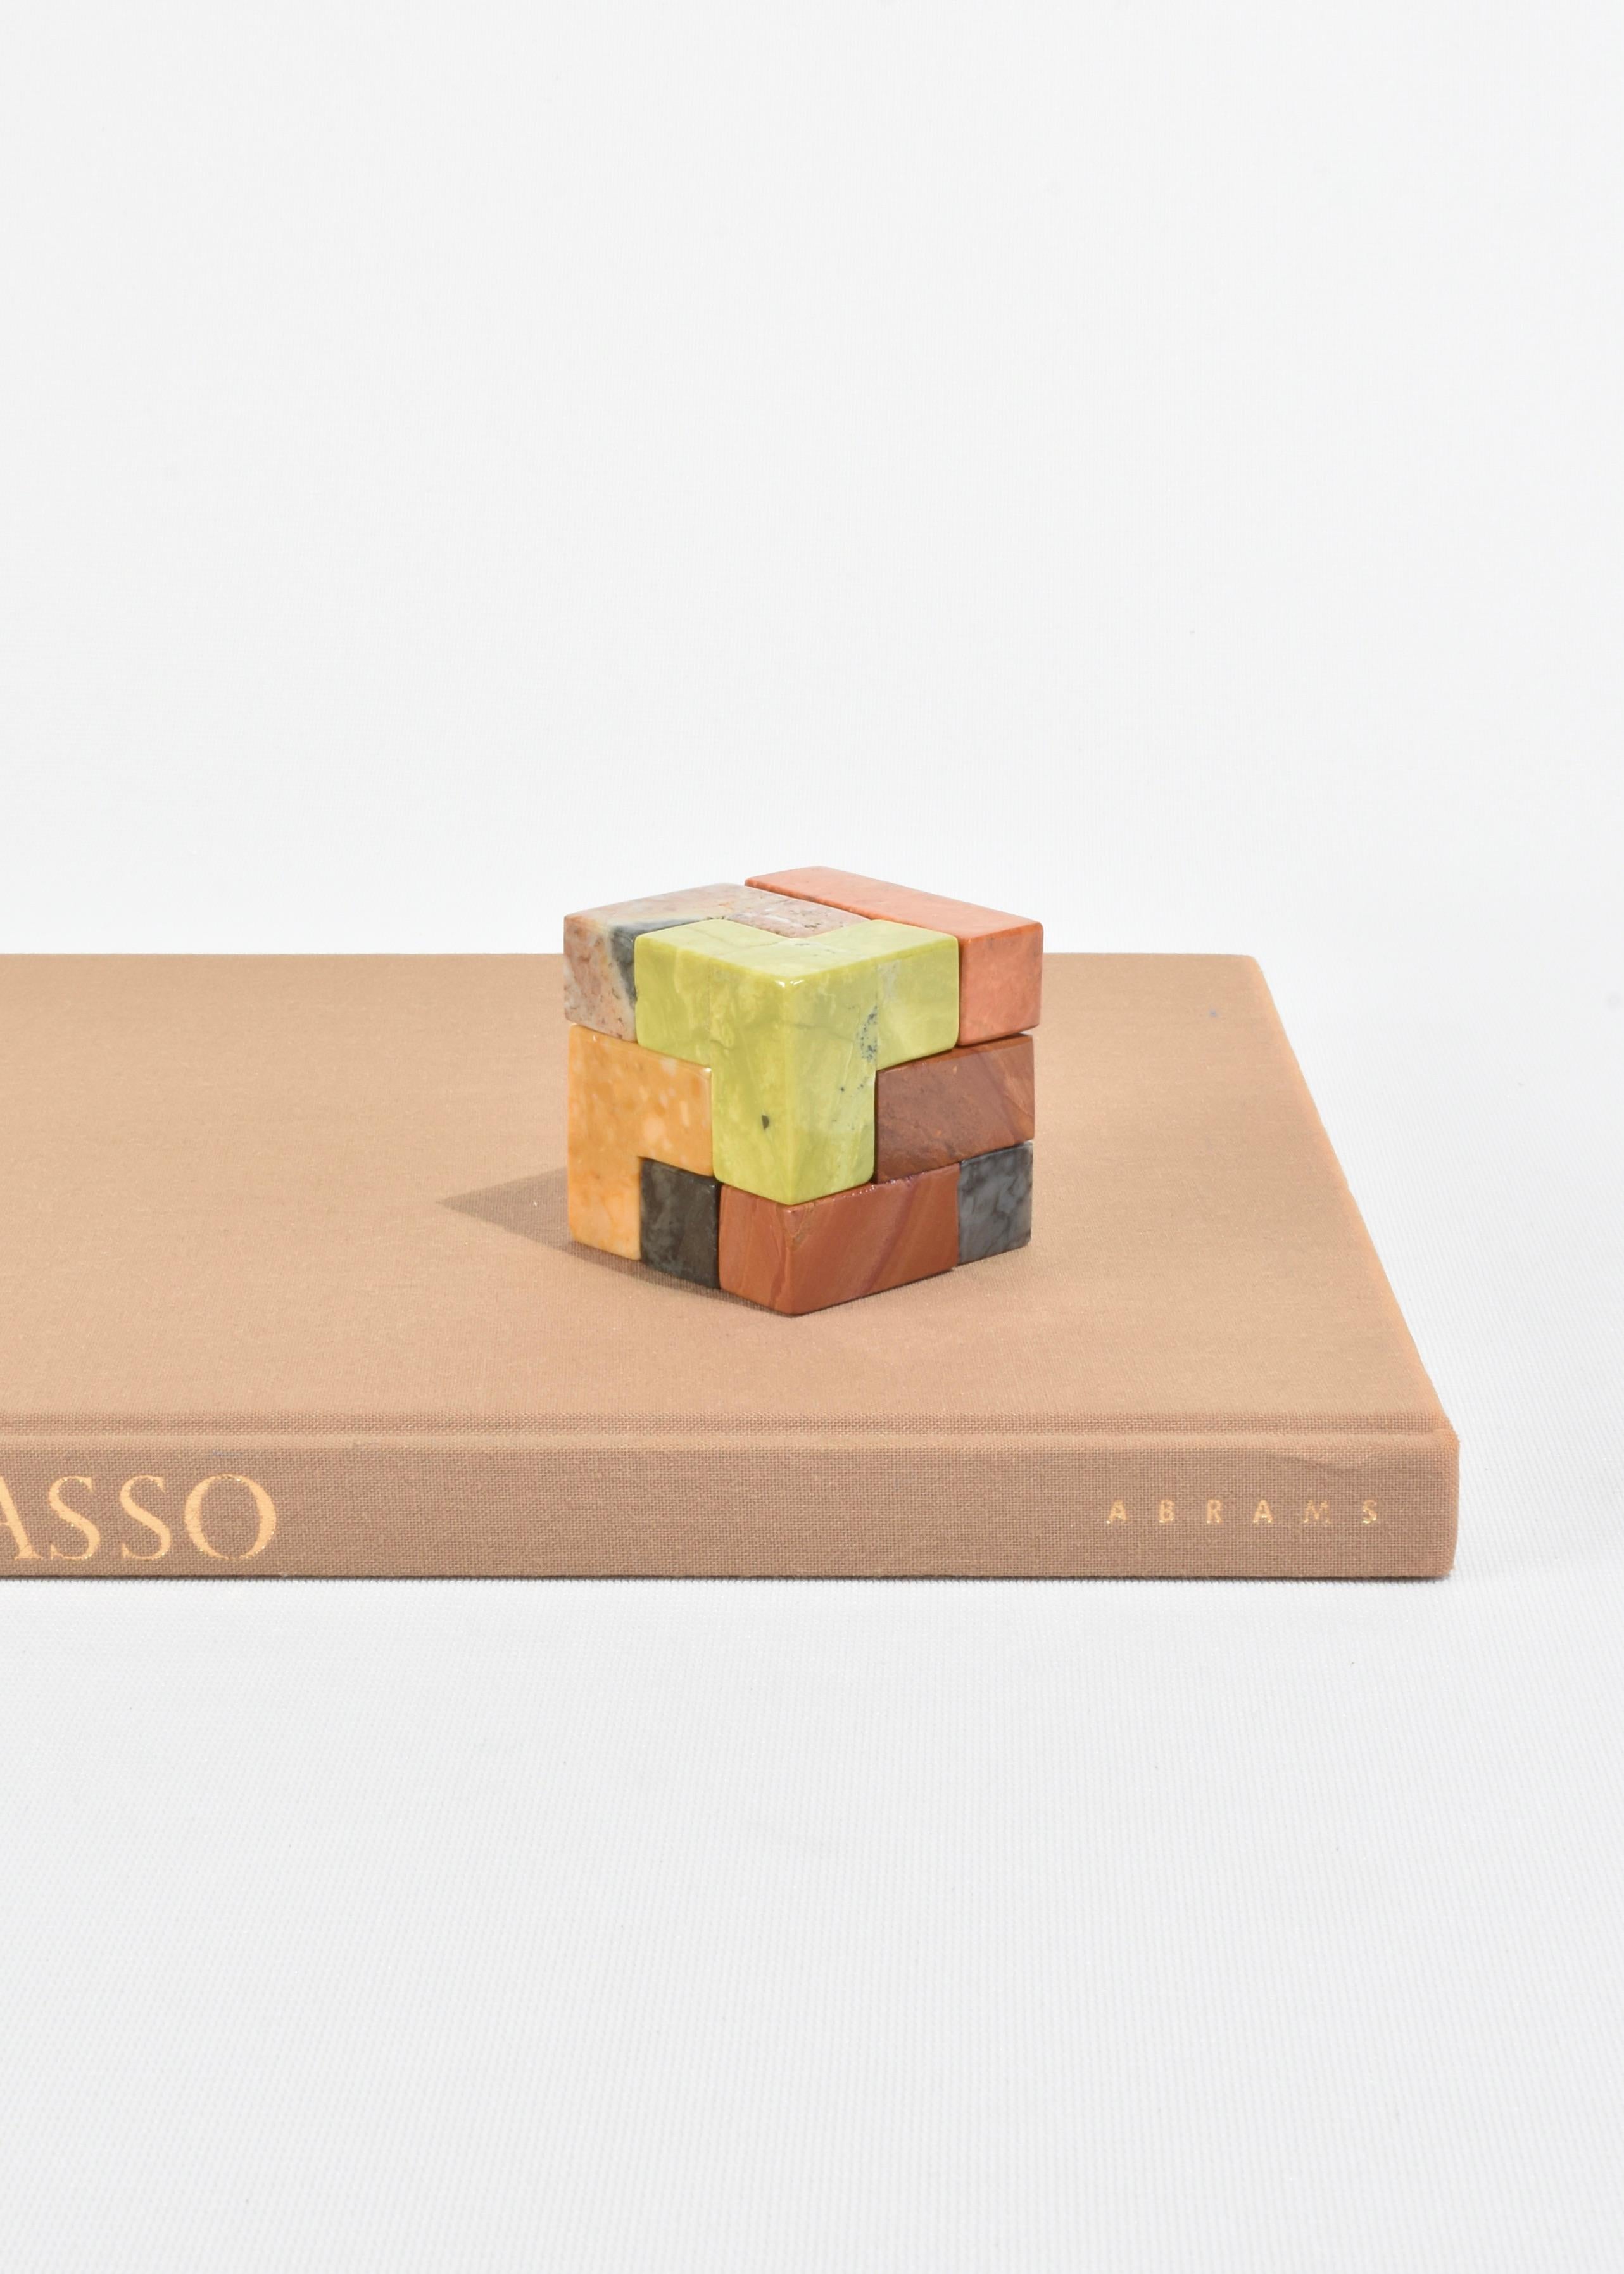 Hand-carved soma cube puzzle sculpture in a mix of 7 brightly colored semi-precious stones that form a perfect square (with 32 ways to solve). A beautiful coffee table piece or sculptural object when not in use and the perfect gift for architects,